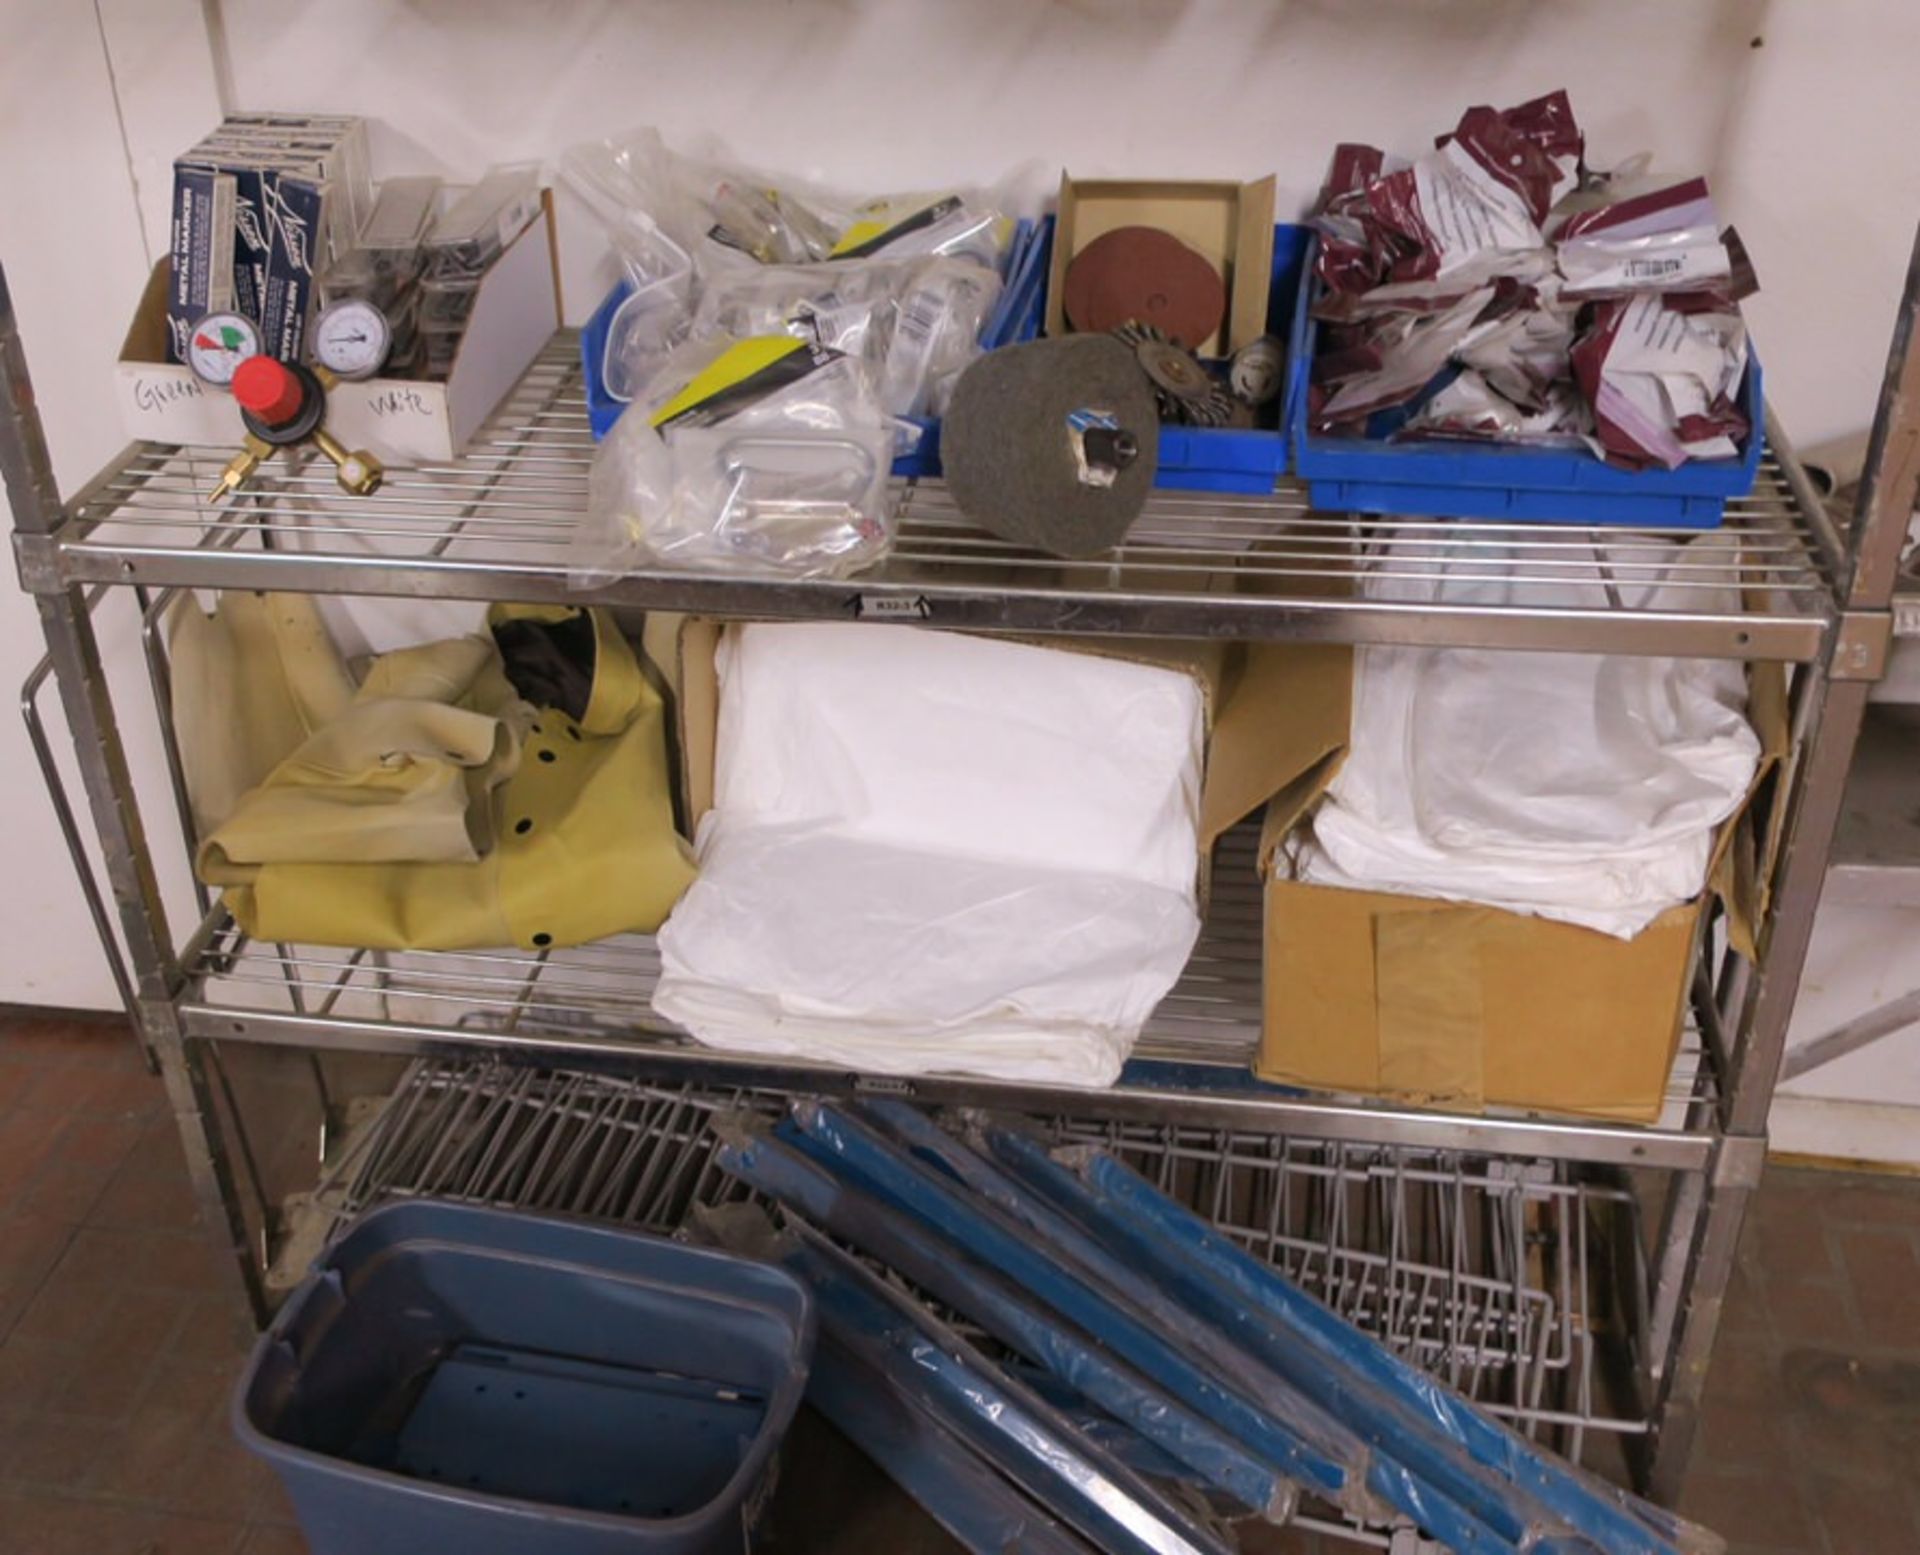 LOT of Tyvec Suits, Scales, Misc. Other Items + Wire 4-Shelf Stainless Steel Storage Unit - Image 3 of 3